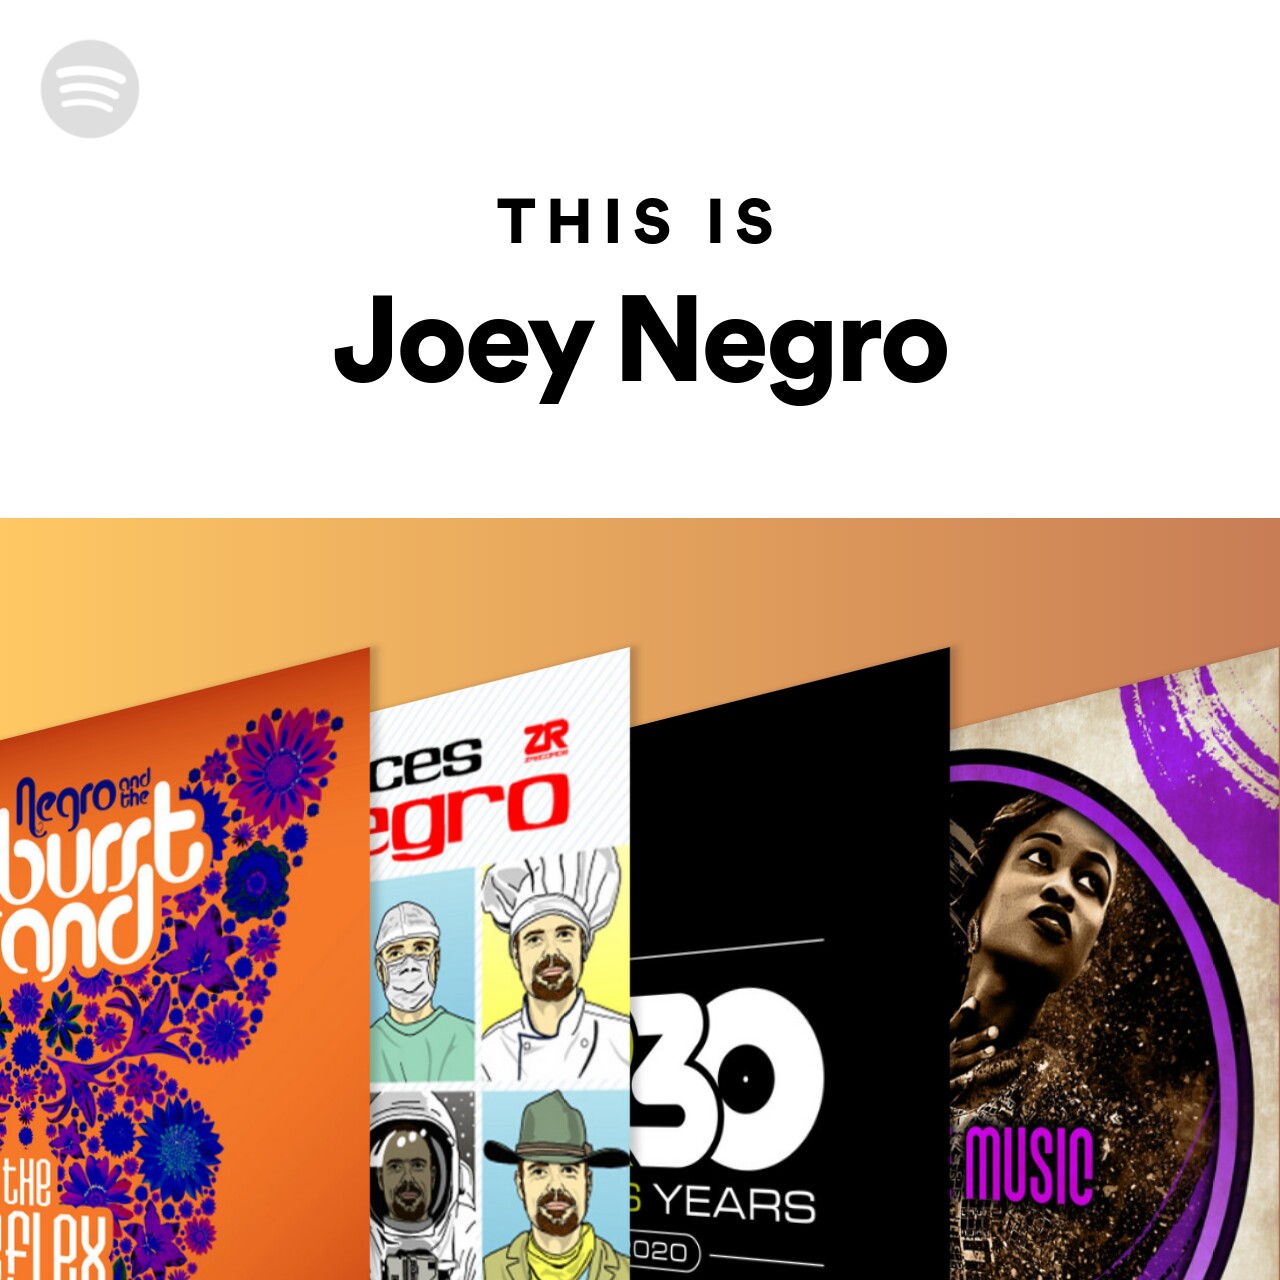 This Is Joey Negro by spotify Spotify Playlist